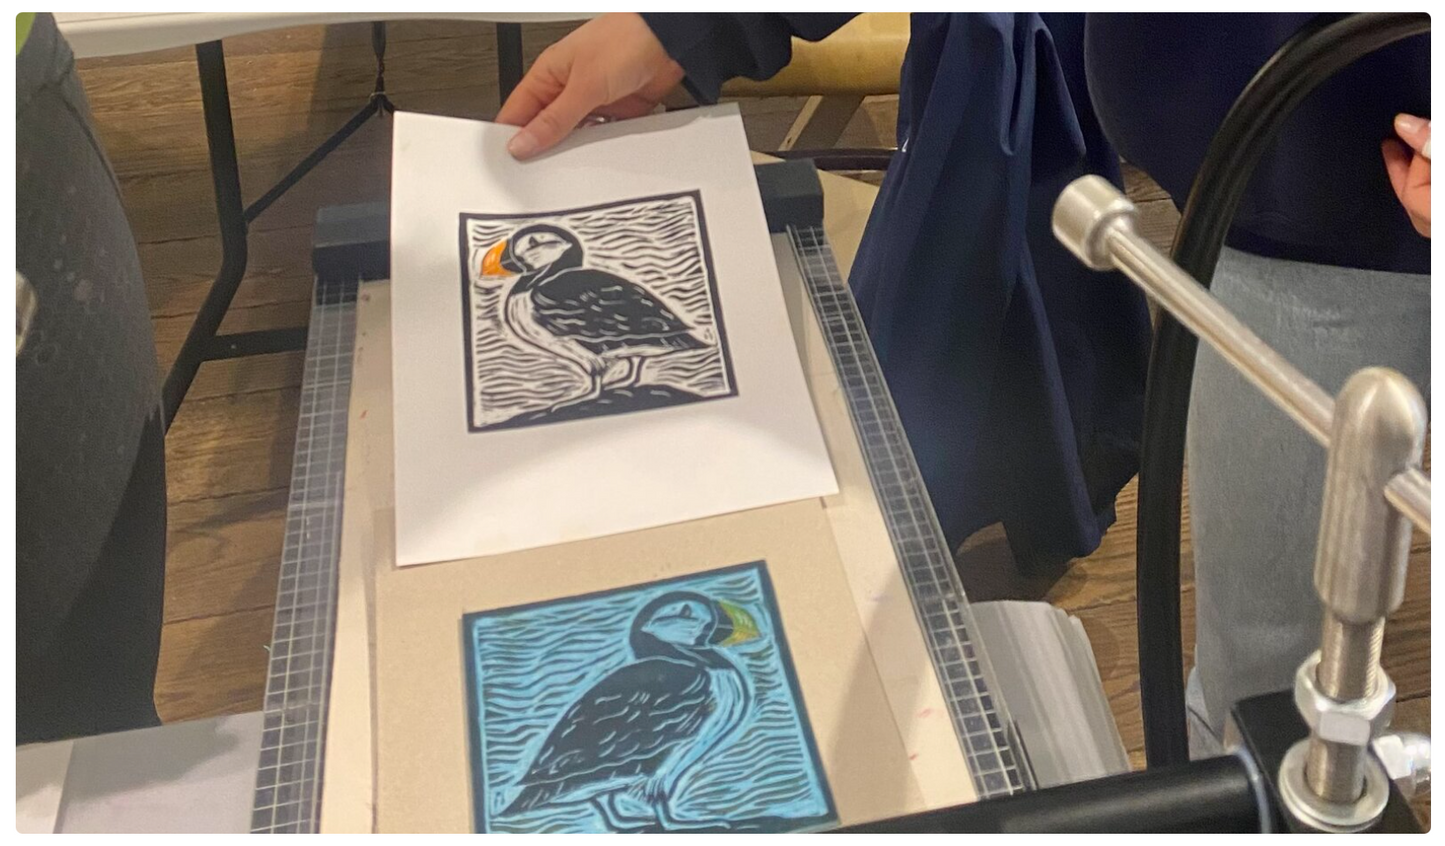 Play with Printmaking - 6 wks or drop in